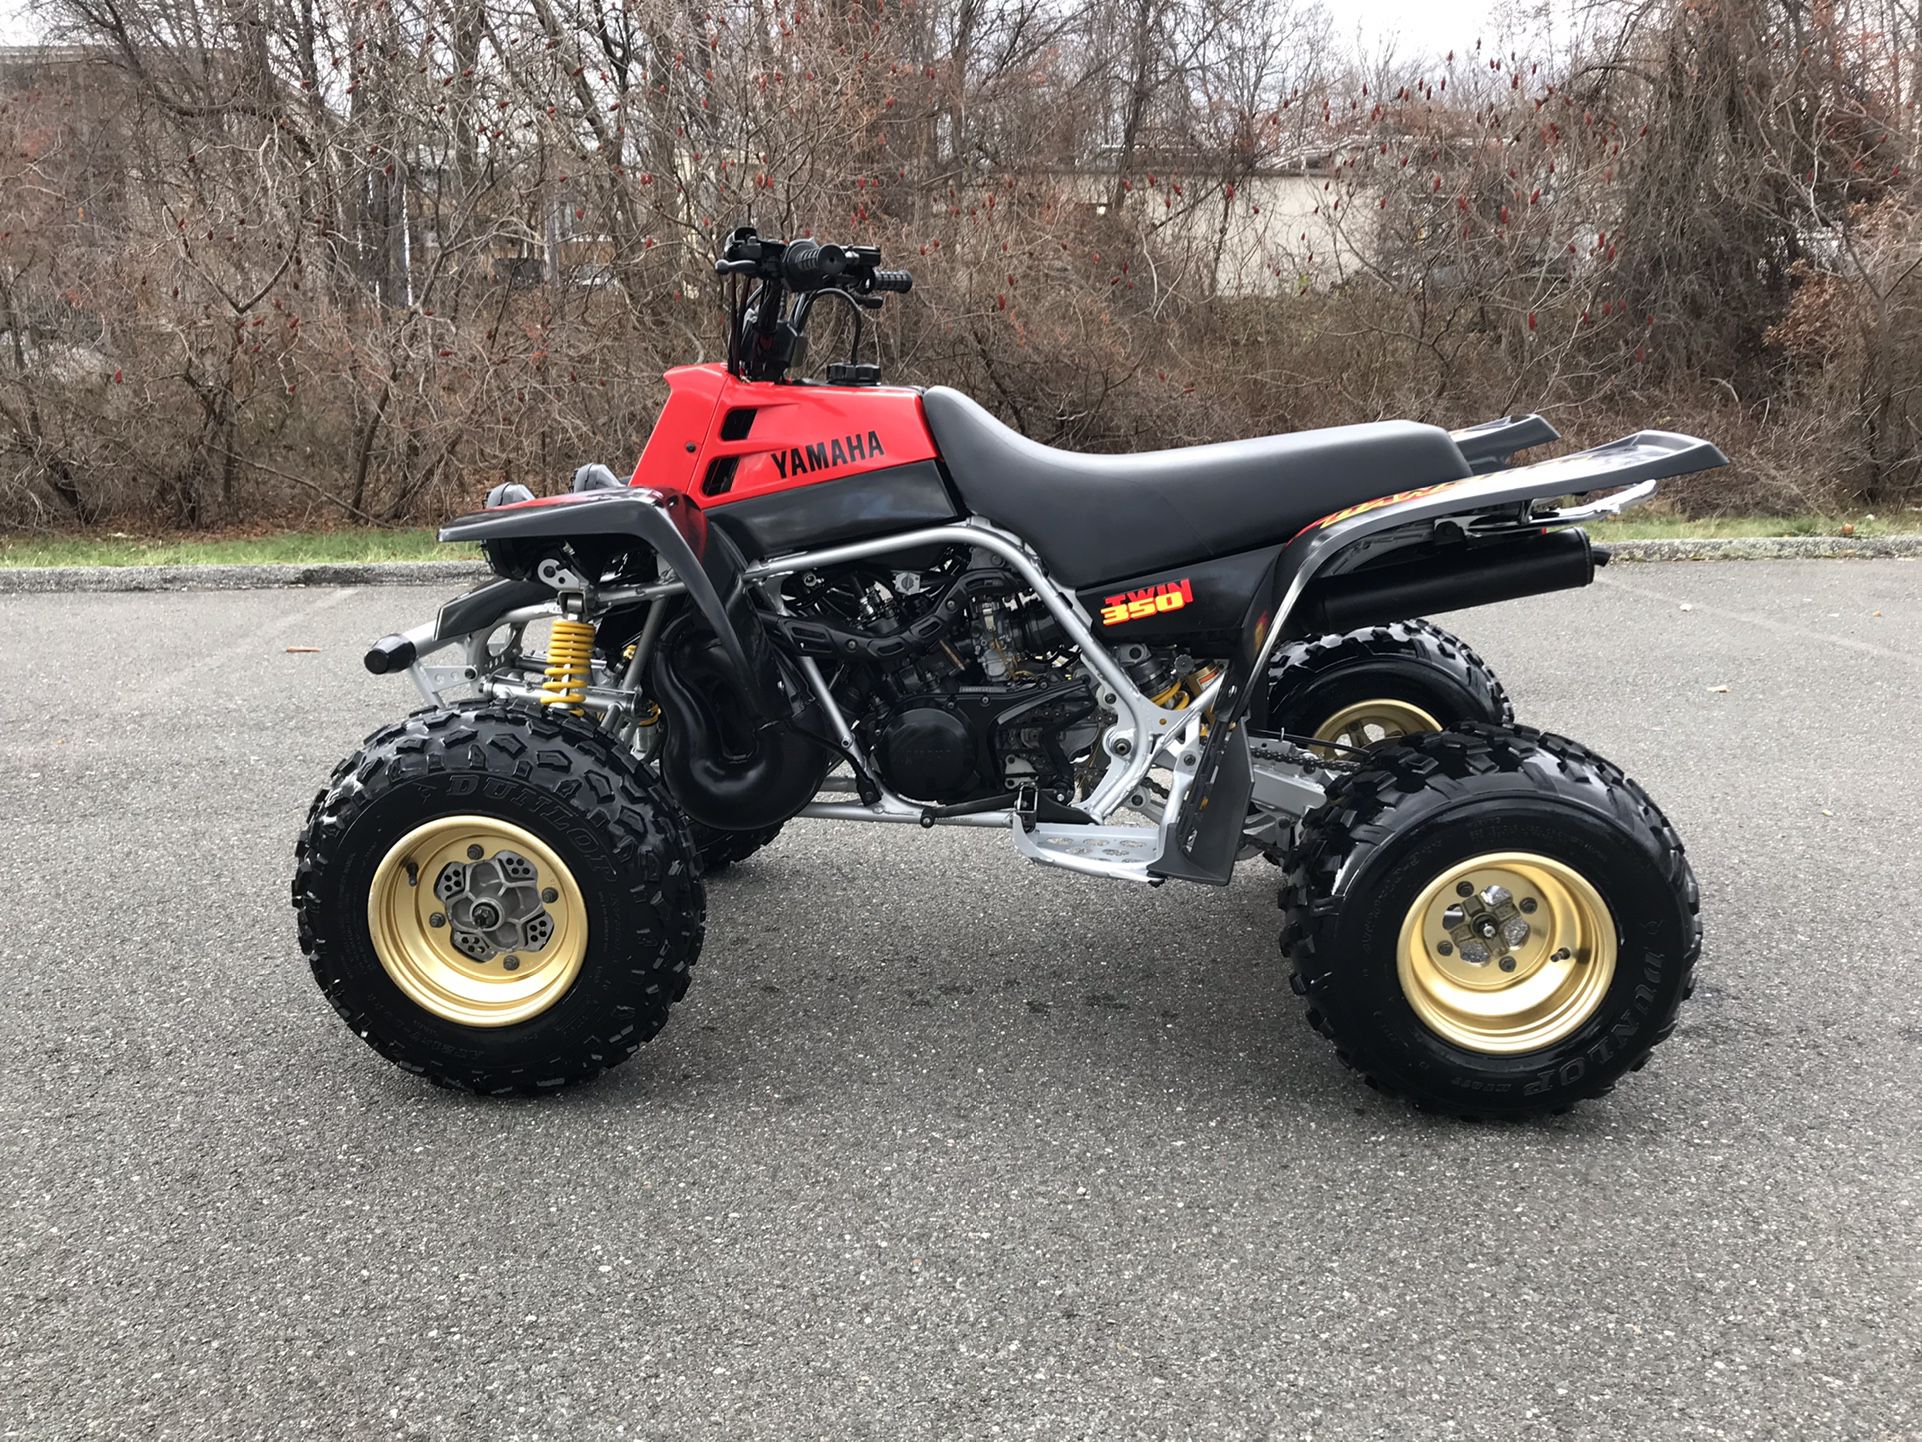 1997 Yamaha Banshee NO TRADE!!! THE PRICE IS FIRM